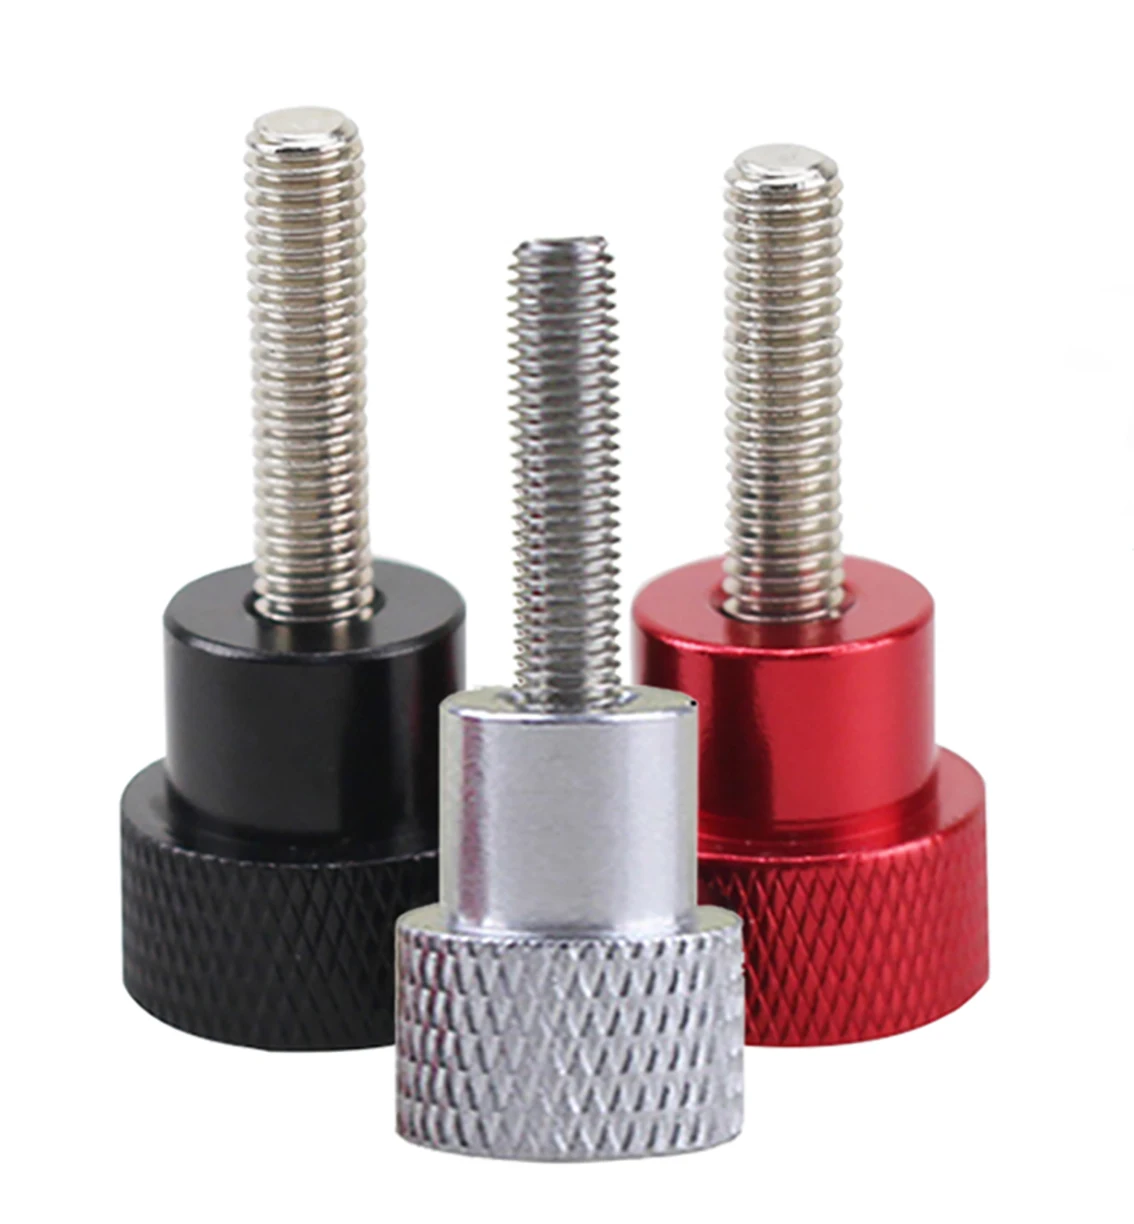 M2 to M10 Knurled Thumb Nuts Hand Grip Knob Nut Blind Hole Details about   Stainless Steel 